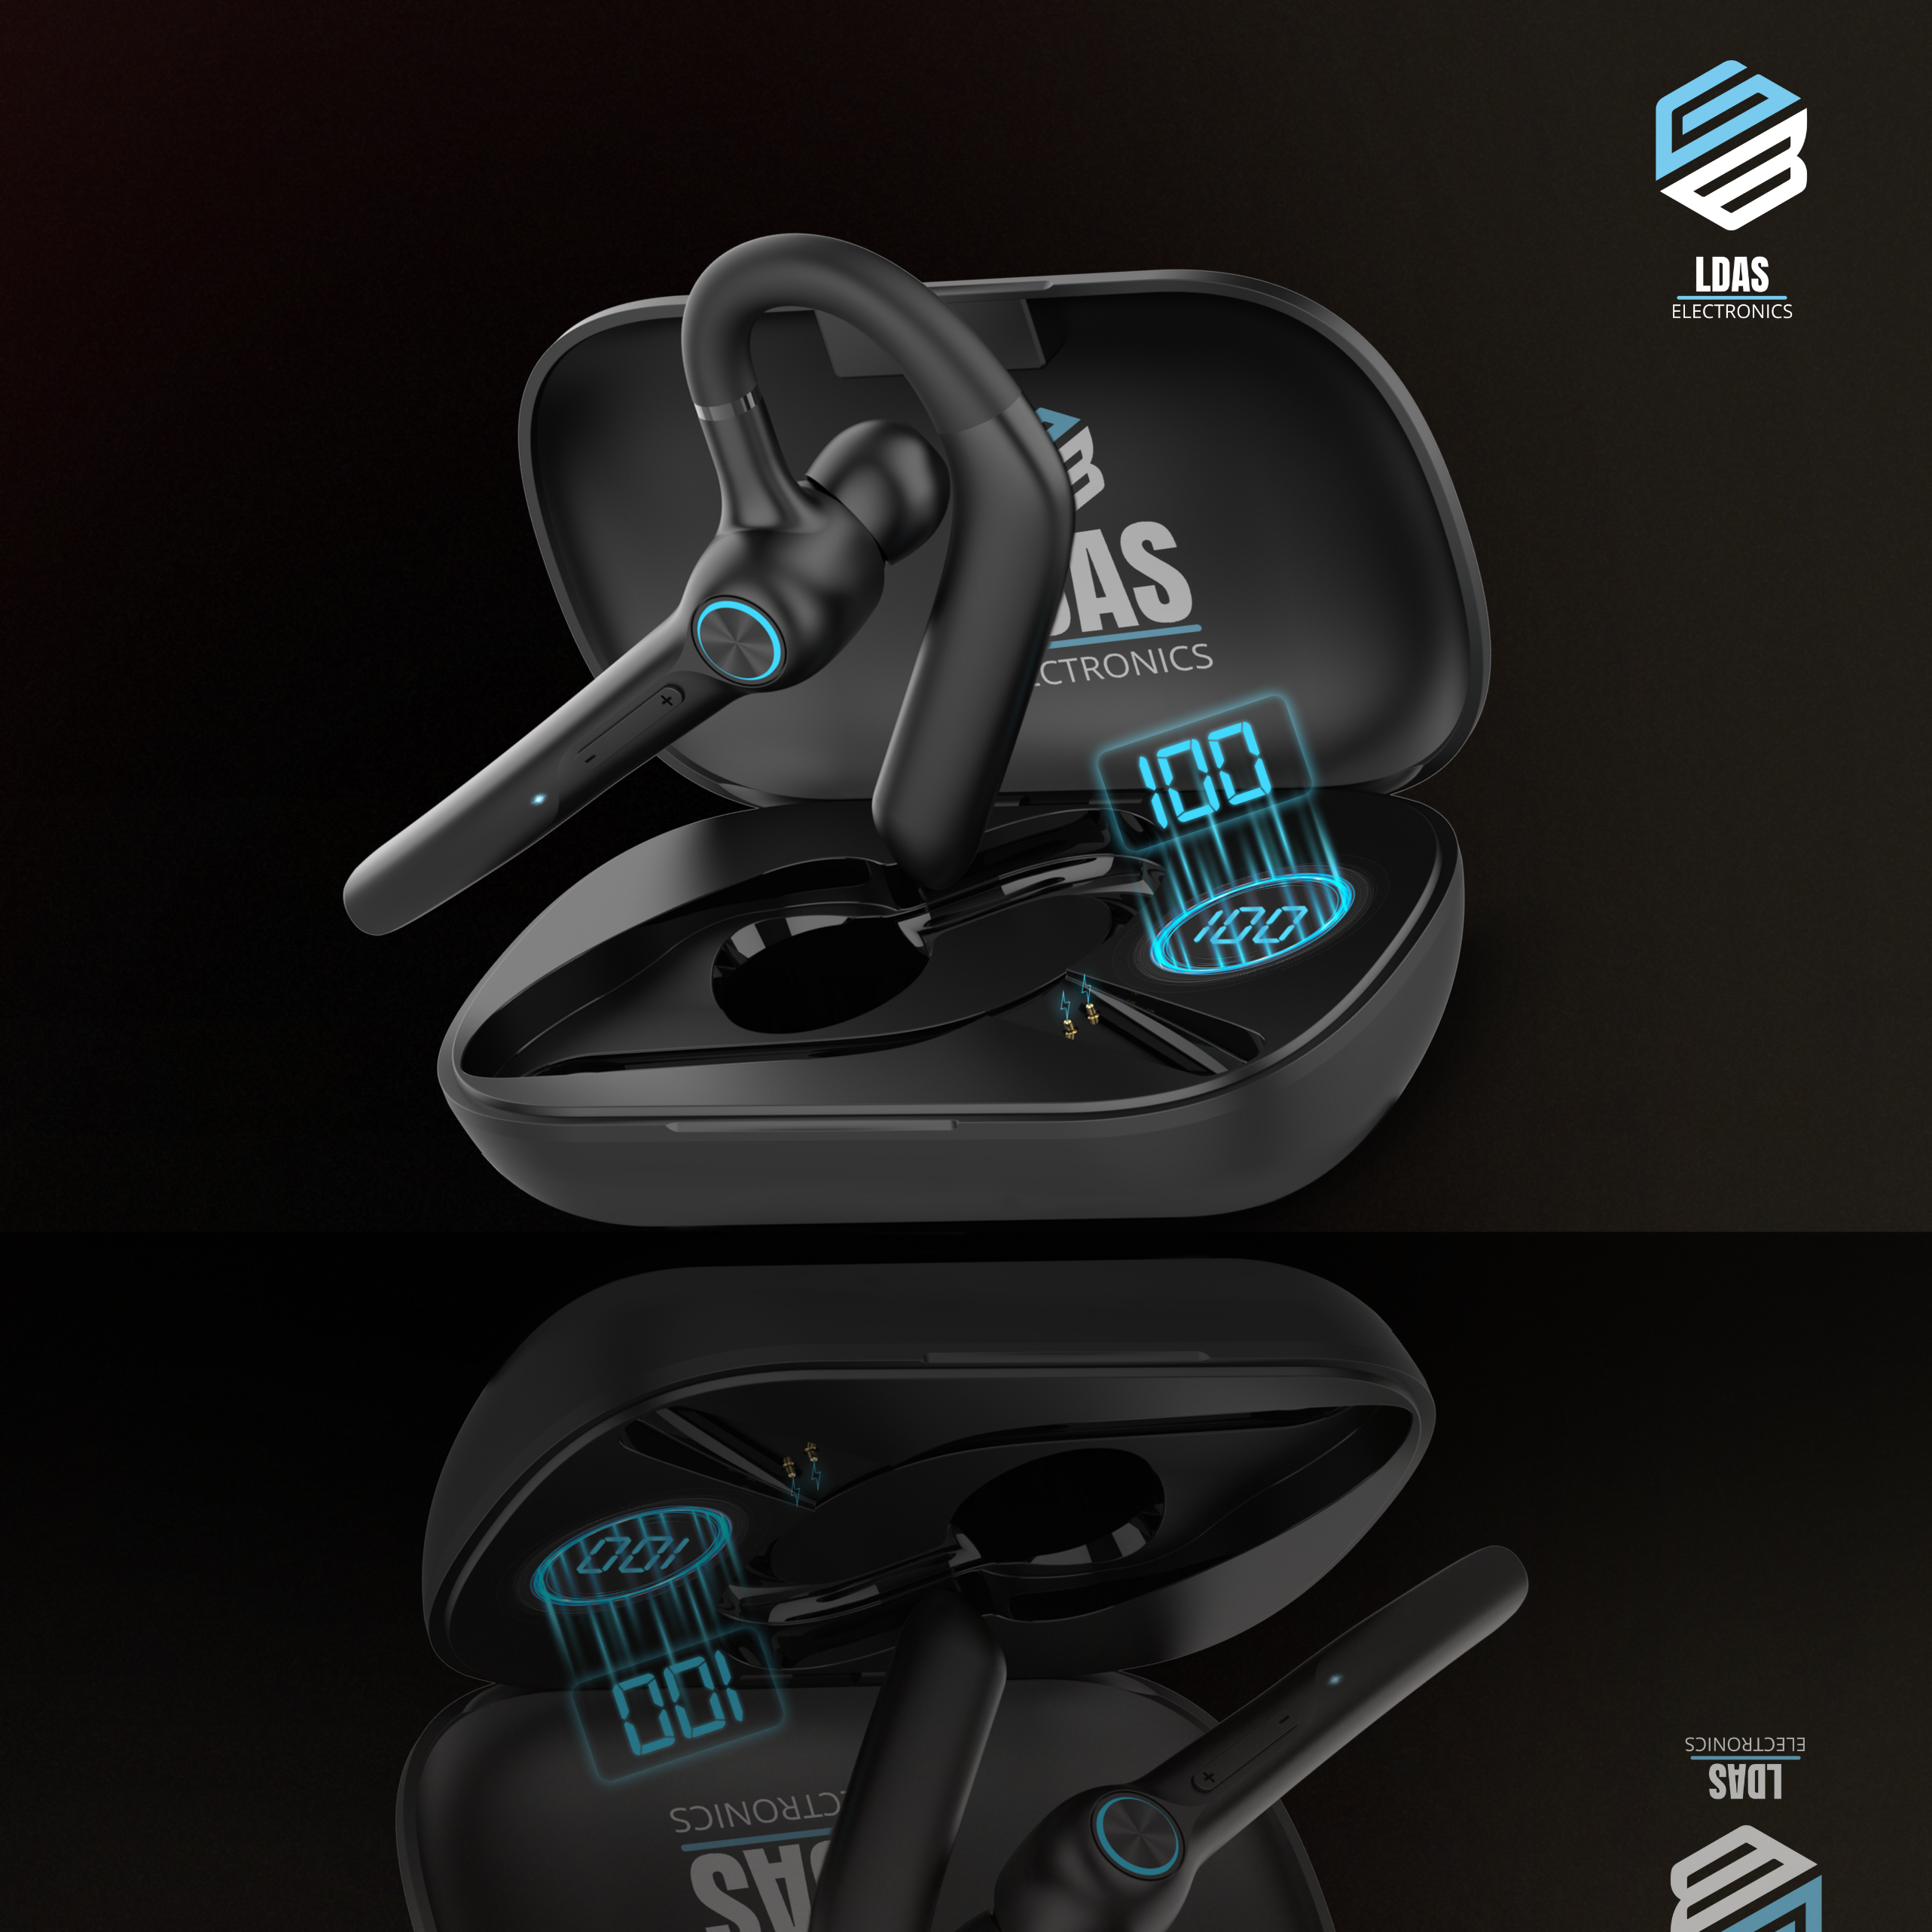 LDAS G3 best earpiece in the market open case of G7 show us the earpiece with logo and charging monitor on top corner is the brand logo